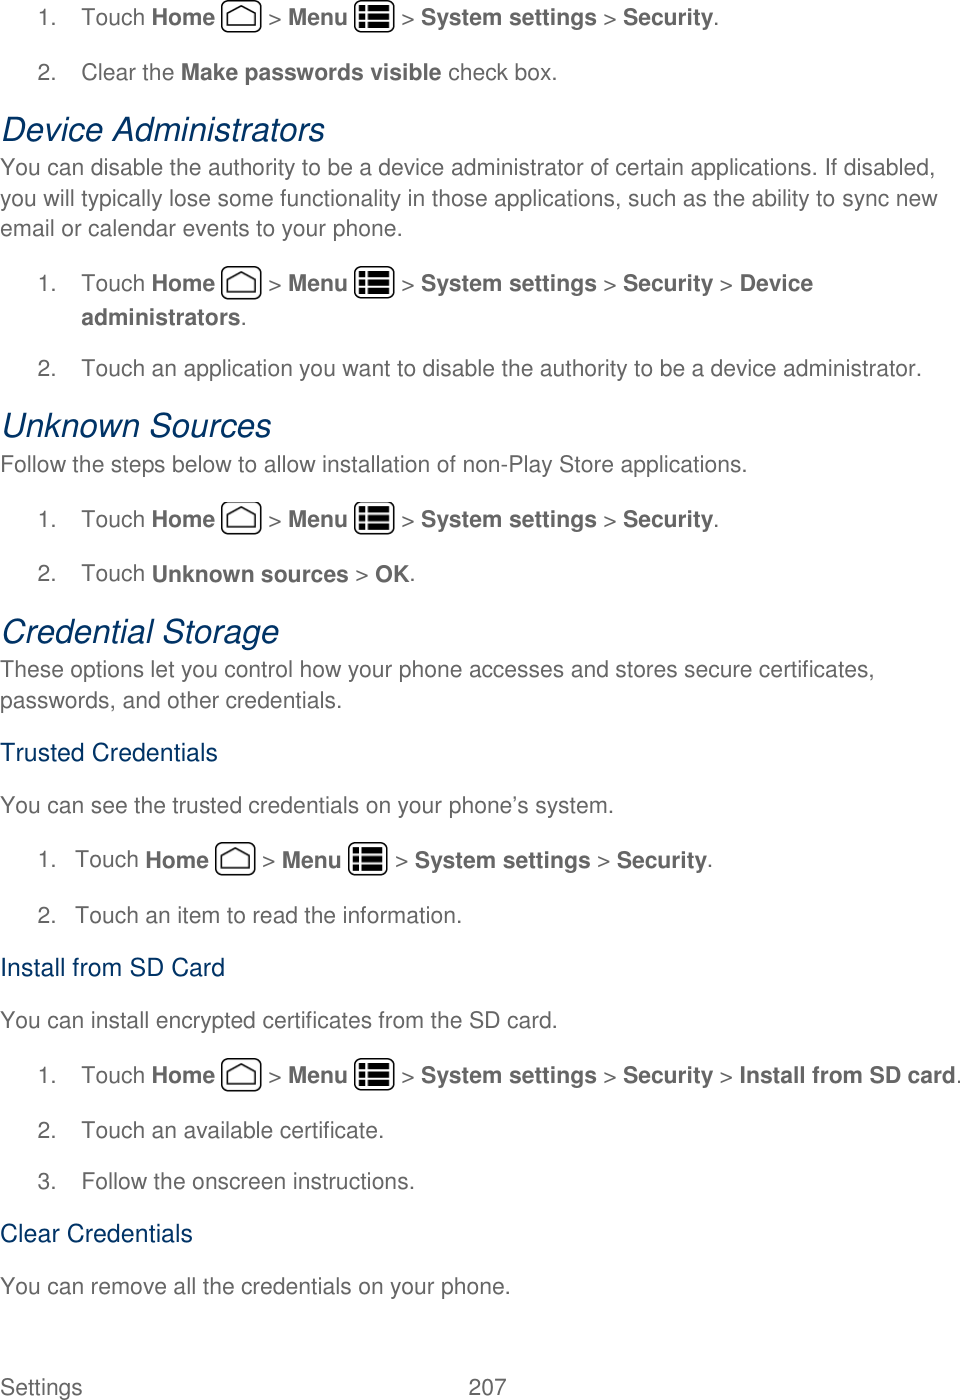 Settings    207 1.  Touch Home   &gt; Menu   &gt; System settings &gt; Security. 2.  Clear the Make passwords visible check box. Device Administrators You can disable the authority to be a device administrator of certain applications. If disabled, you will typically lose some functionality in those applications, such as the ability to sync new email or calendar events to your phone. 1.  Touch Home   &gt; Menu   &gt; System settings &gt; Security &gt; Device administrators. 2.  Touch an application you want to disable the authority to be a device administrator. Unknown Sources Follow the steps below to allow installation of non-Play Store applications. 1.  Touch Home   &gt; Menu   &gt; System settings &gt; Security. 2.  Touch Unknown sources &gt; OK. Credential Storage These options let you control how your phone accesses and stores secure certificates, passwords, and other credentials. Trusted Credentials You can see the trusted credentials on your phone’s system. 1.  Touch Home   &gt; Menu   &gt; System settings &gt; Security. 2.  Touch an item to read the information. Install from SD Card You can install encrypted certificates from the SD card. 1.  Touch Home   &gt; Menu   &gt; System settings &gt; Security &gt; Install from SD card. 2.  Touch an available certificate. 3.  Follow the onscreen instructions. Clear Credentials You can remove all the credentials on your phone. 